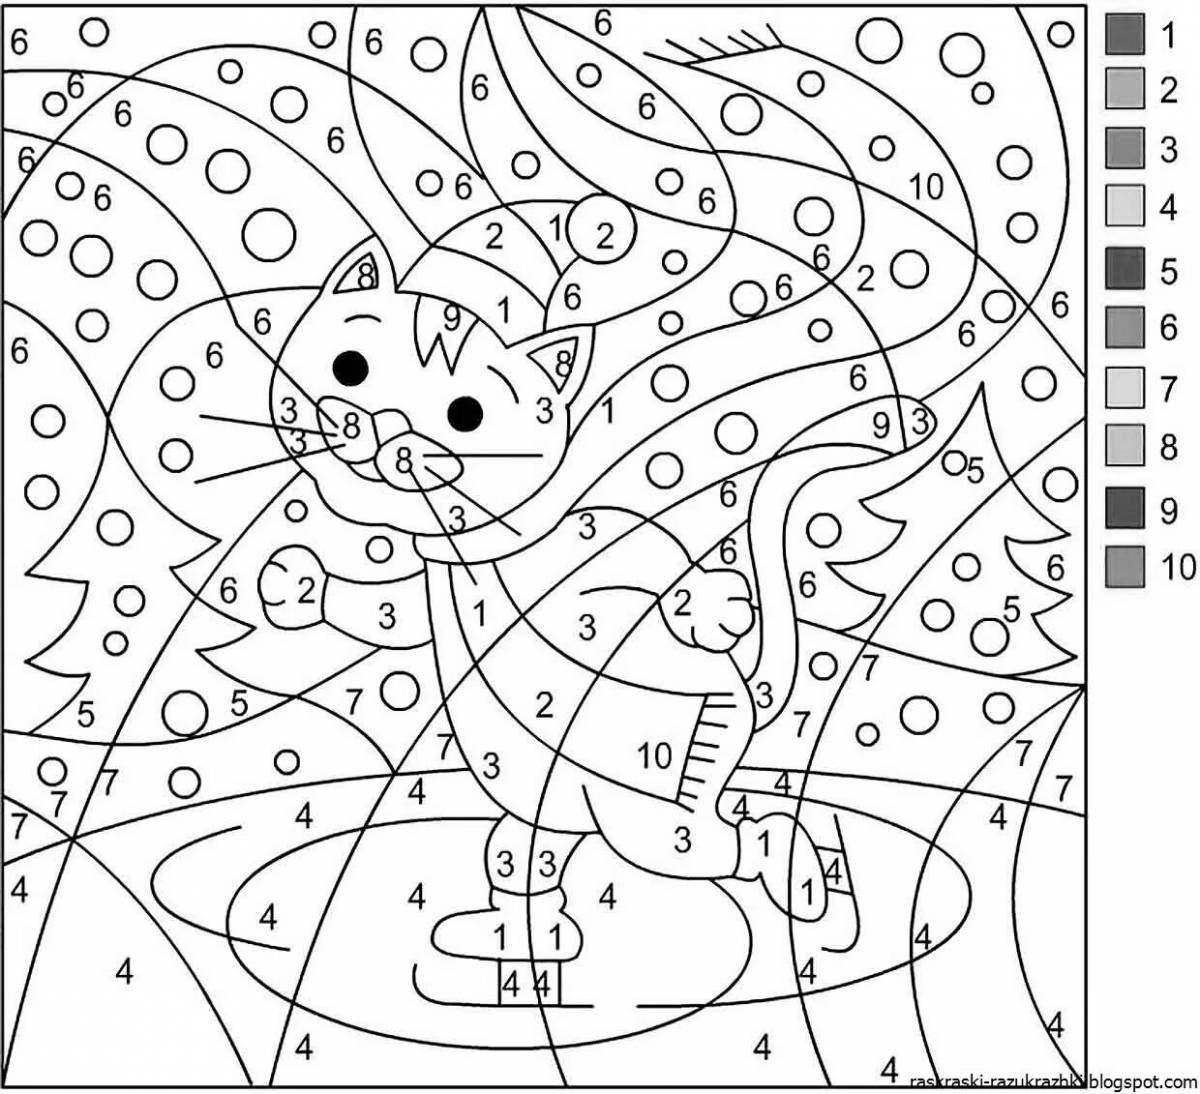 Colorful coloring page 7 years old by numbers